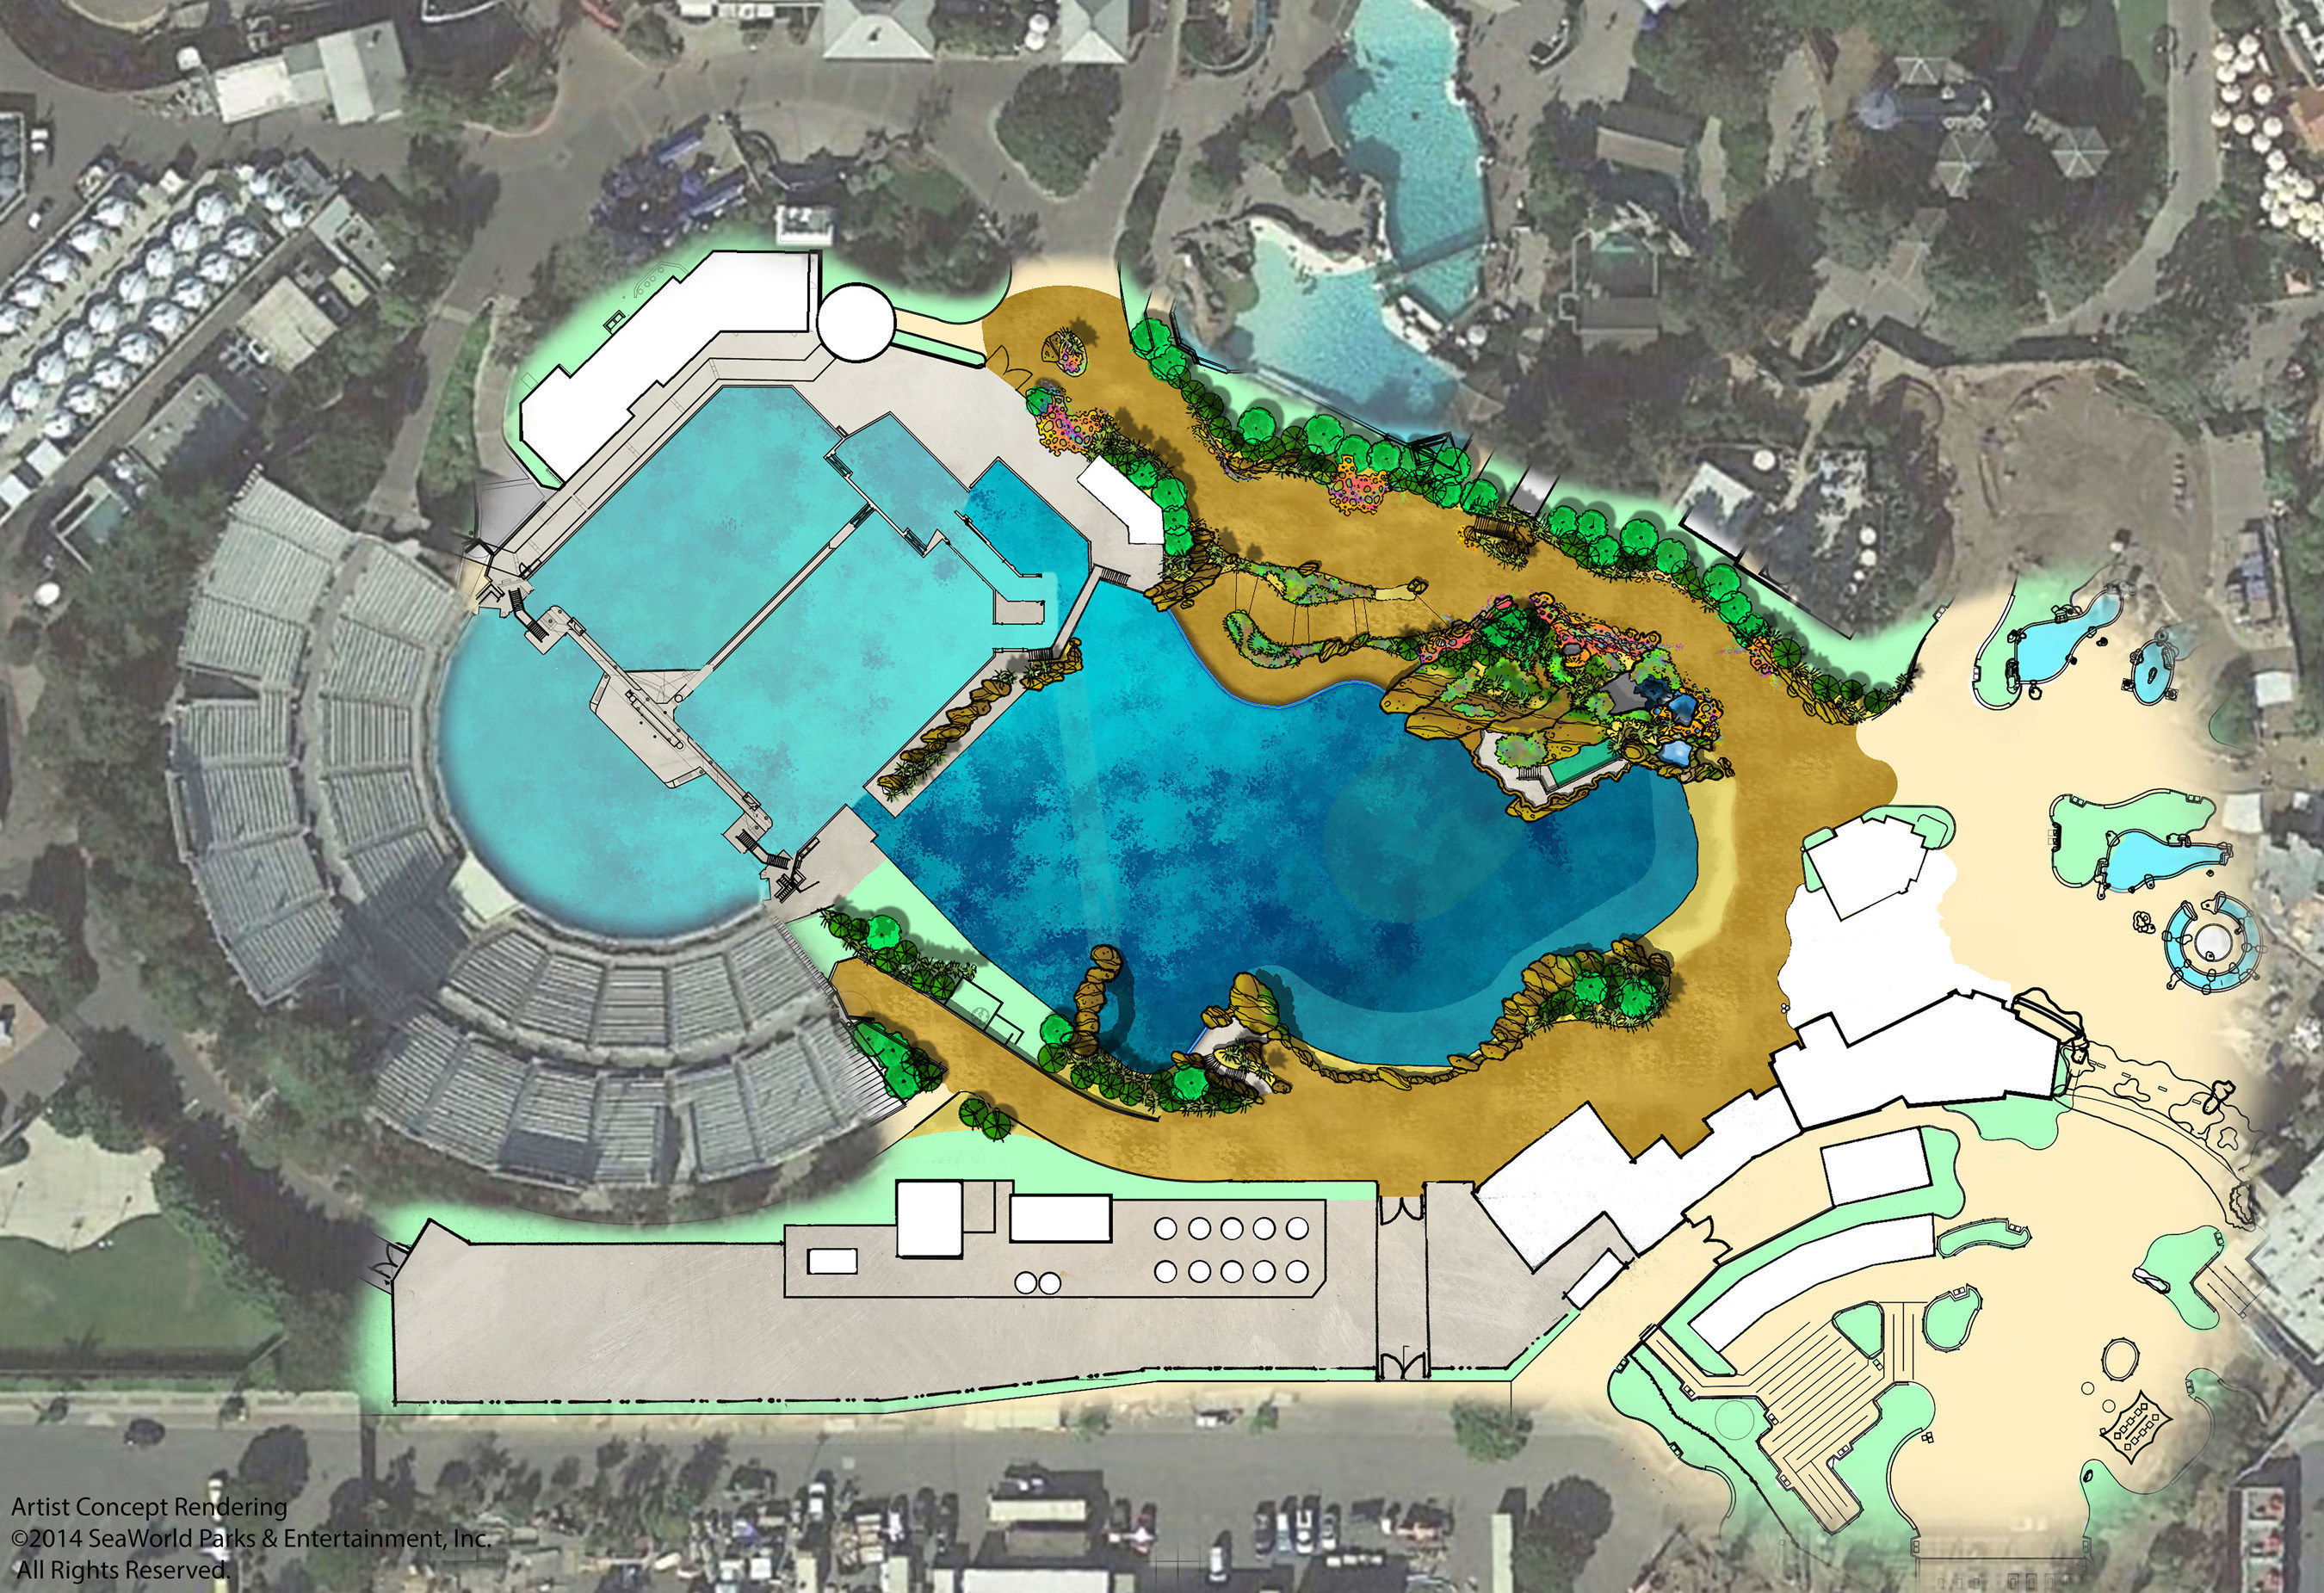 Overhead view of plans for SeaWorld's expanded killer whale environment. The new habitat will nearly double in size. (PRNewsFoto/SeaWorld Entertainment, Inc.)